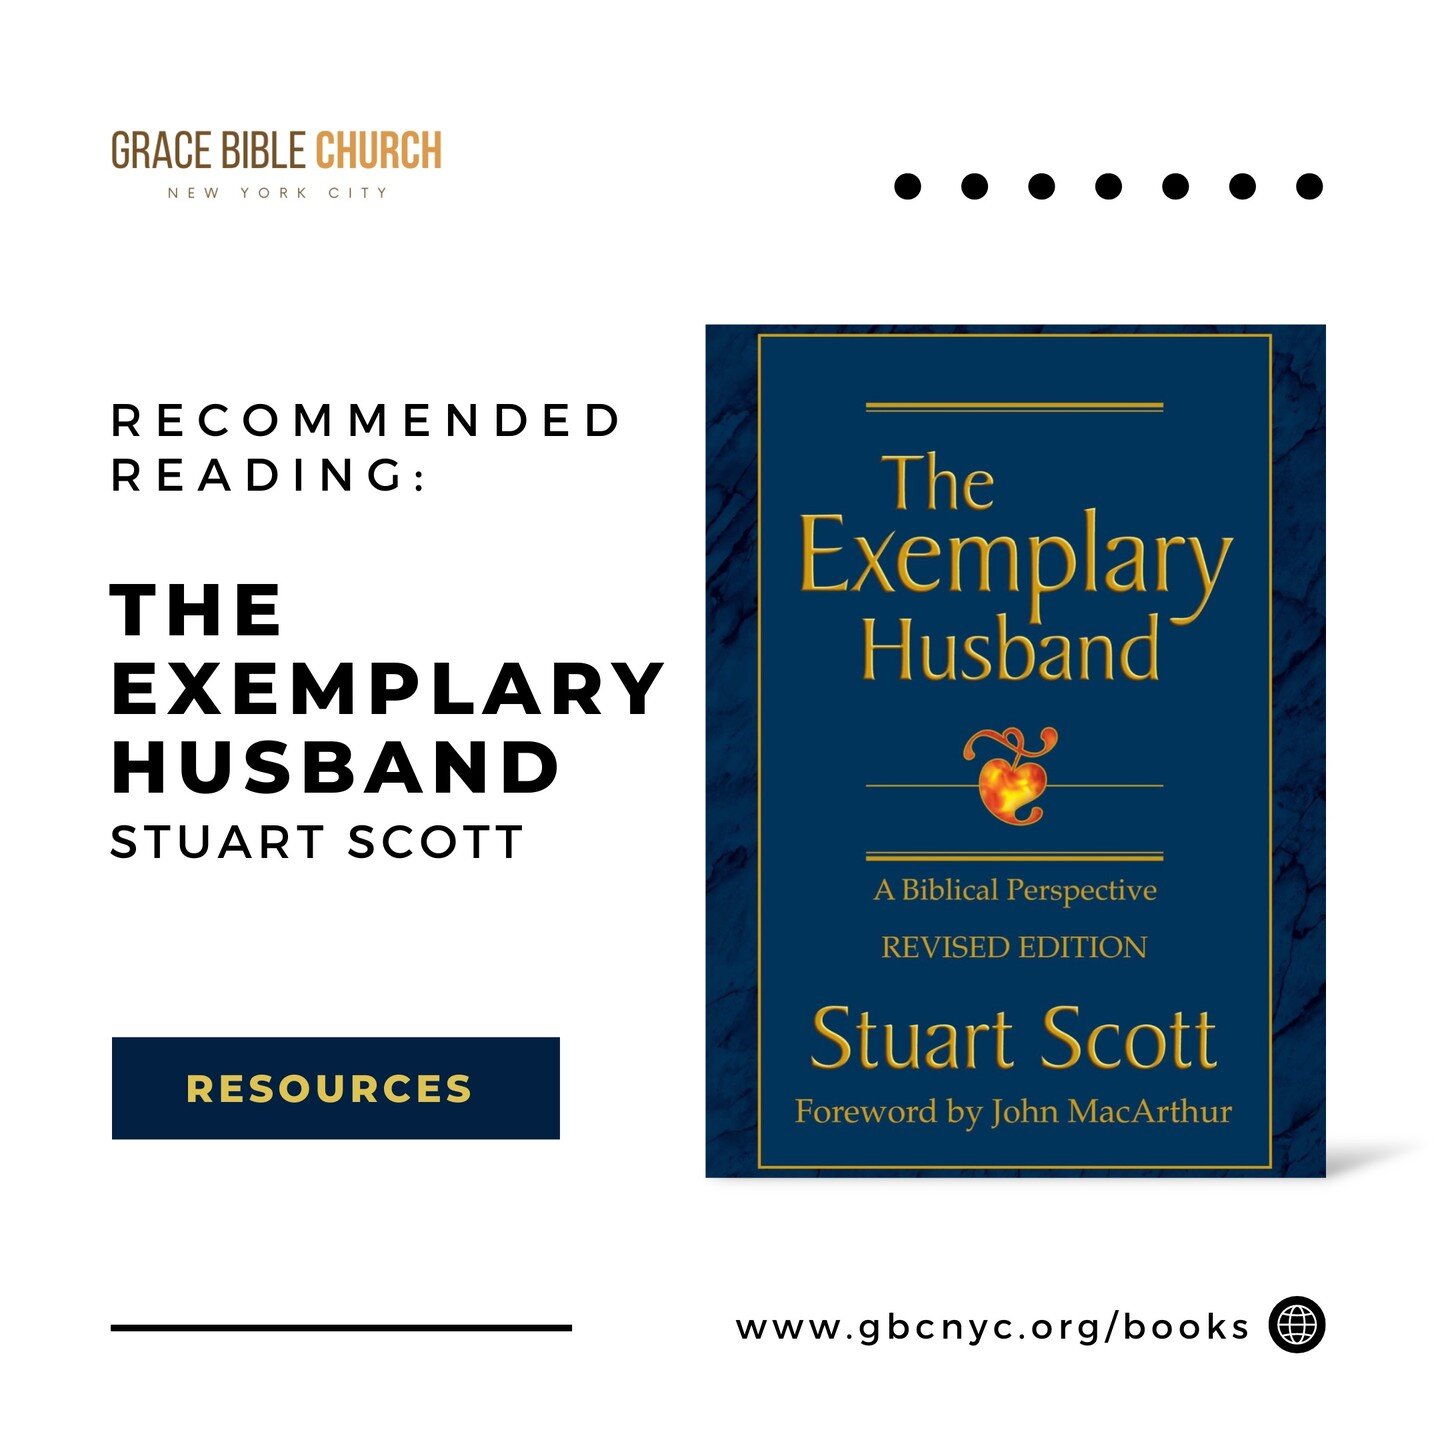 The Exemplary Husband, by Stuart Scott

&ldquo;God ordained marriage between a man and a woman for companionship, procreatioin, and so man would have a &quot;helper suitable.&quot; However, God says much more in the Bible about husbands loving their 